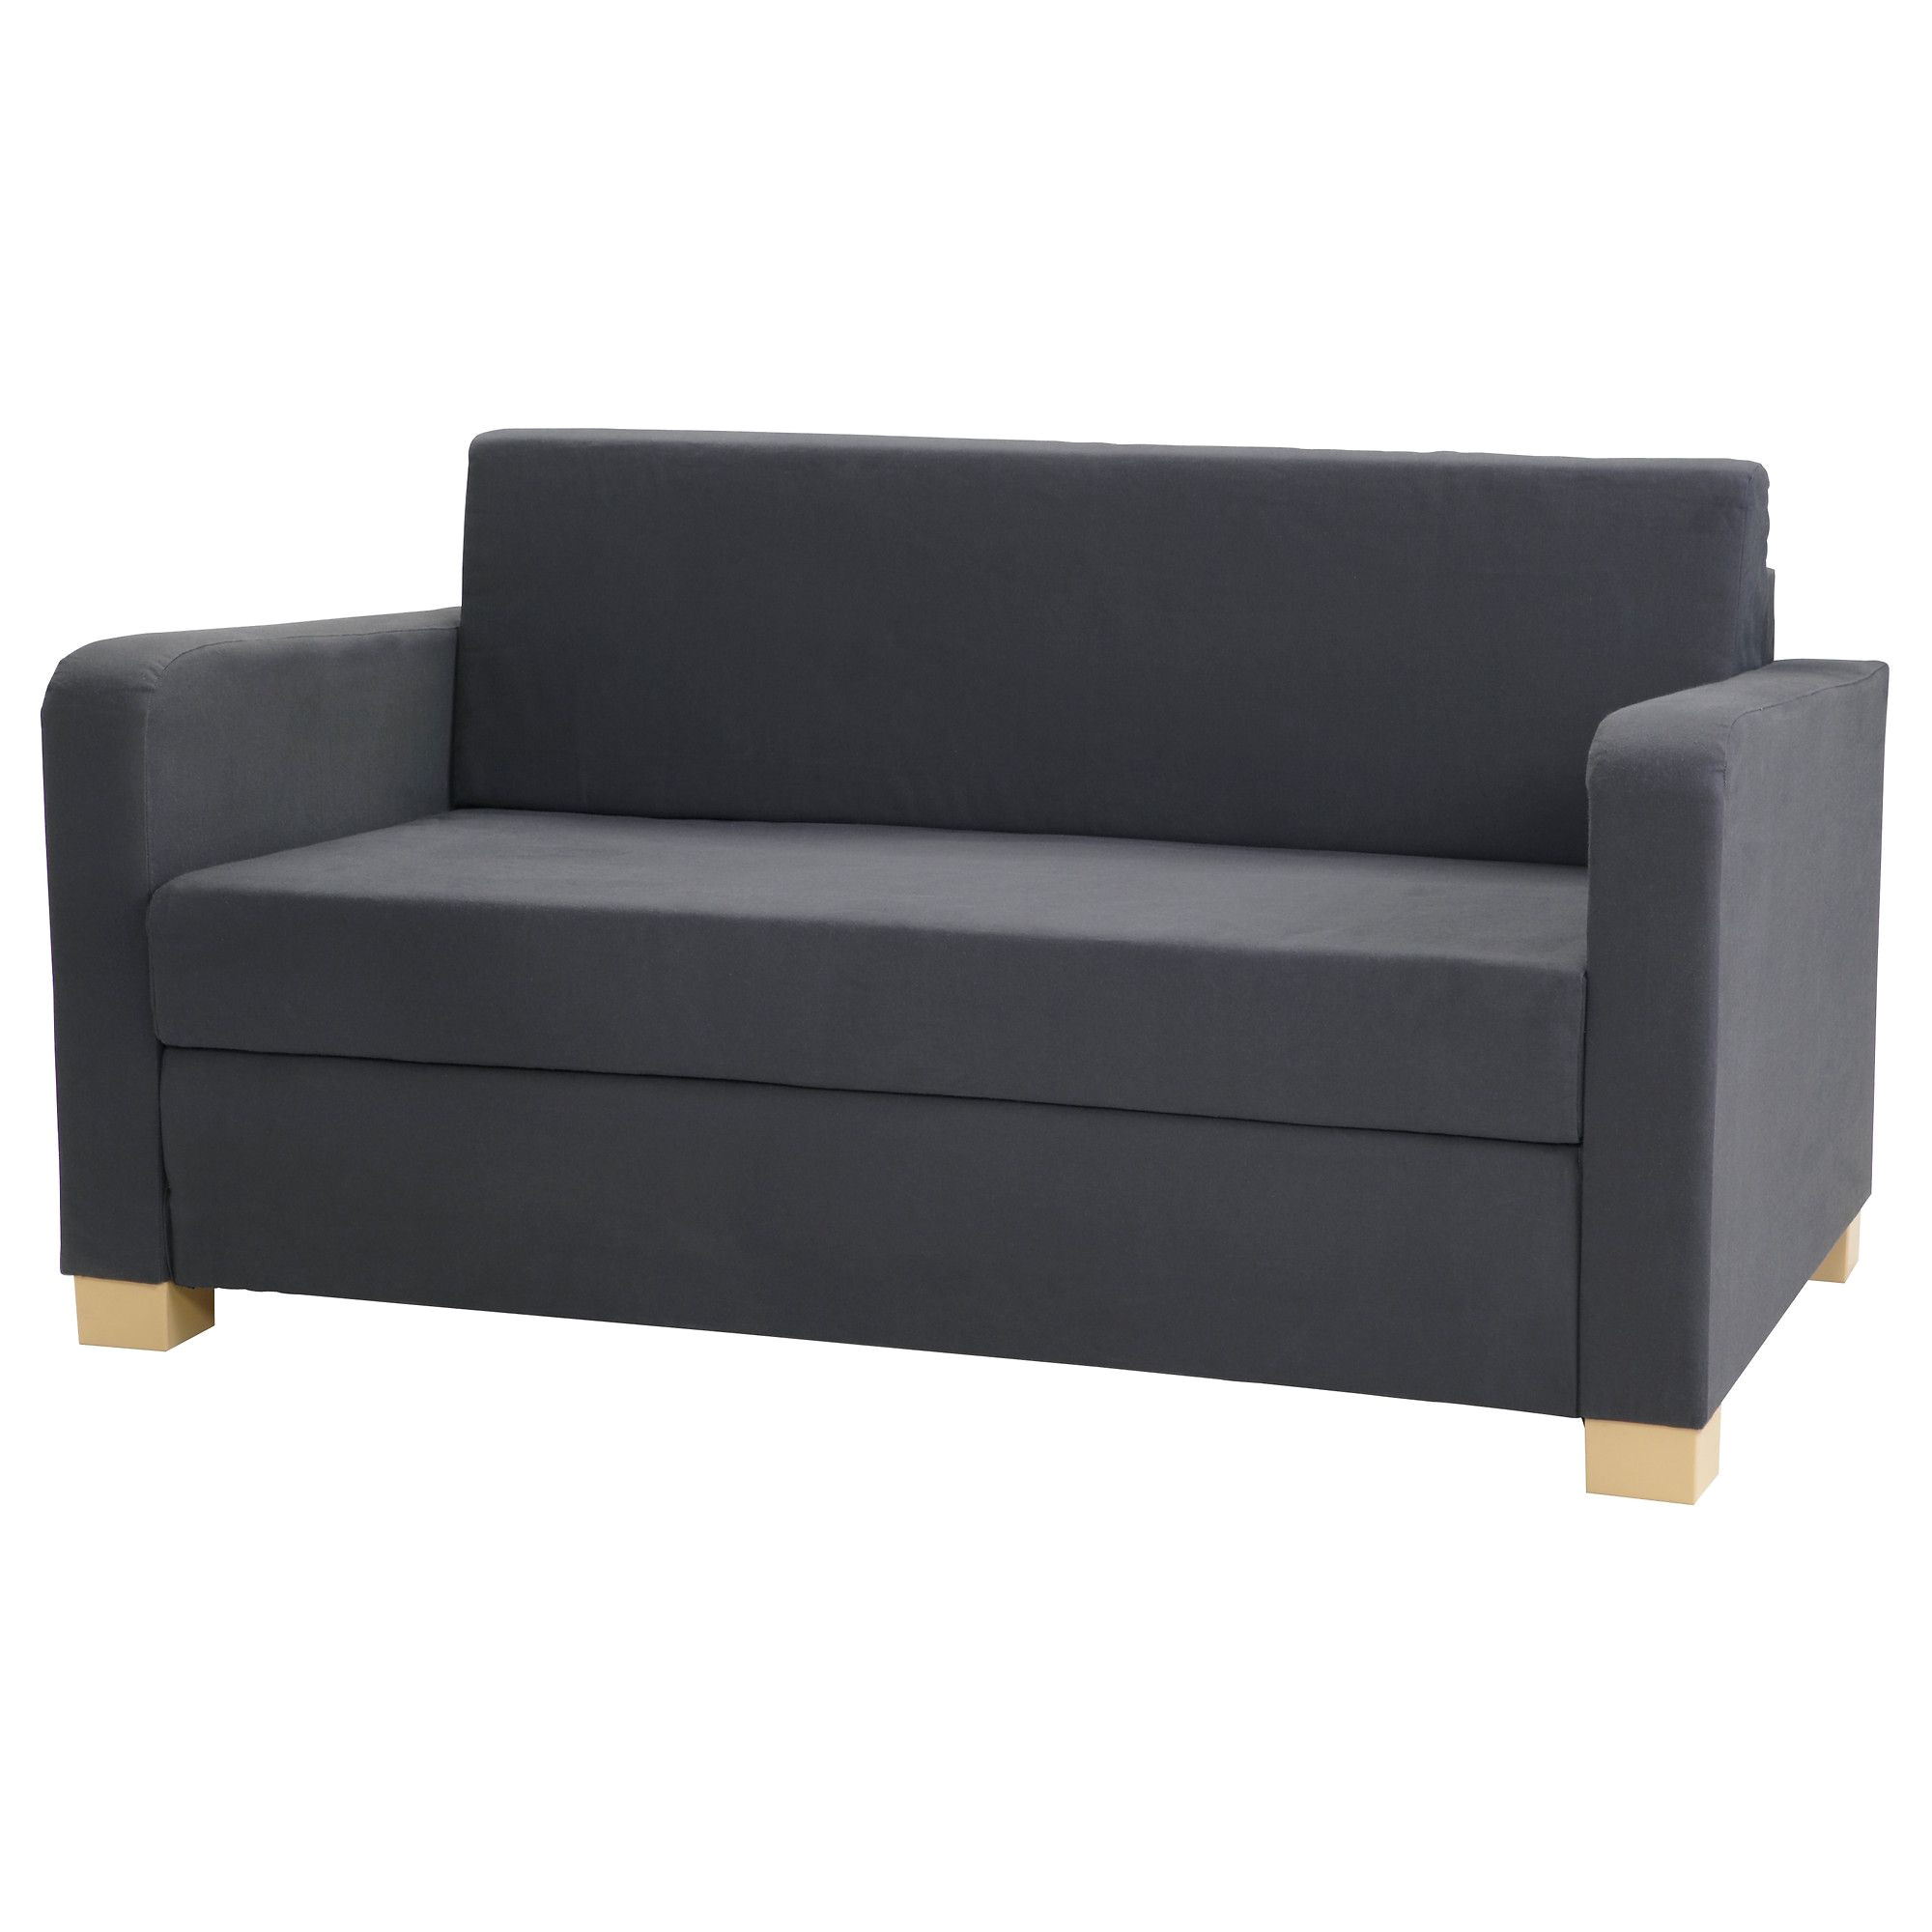 chair sofa bed bedroom couch sleeper couch living room sofa futon couch